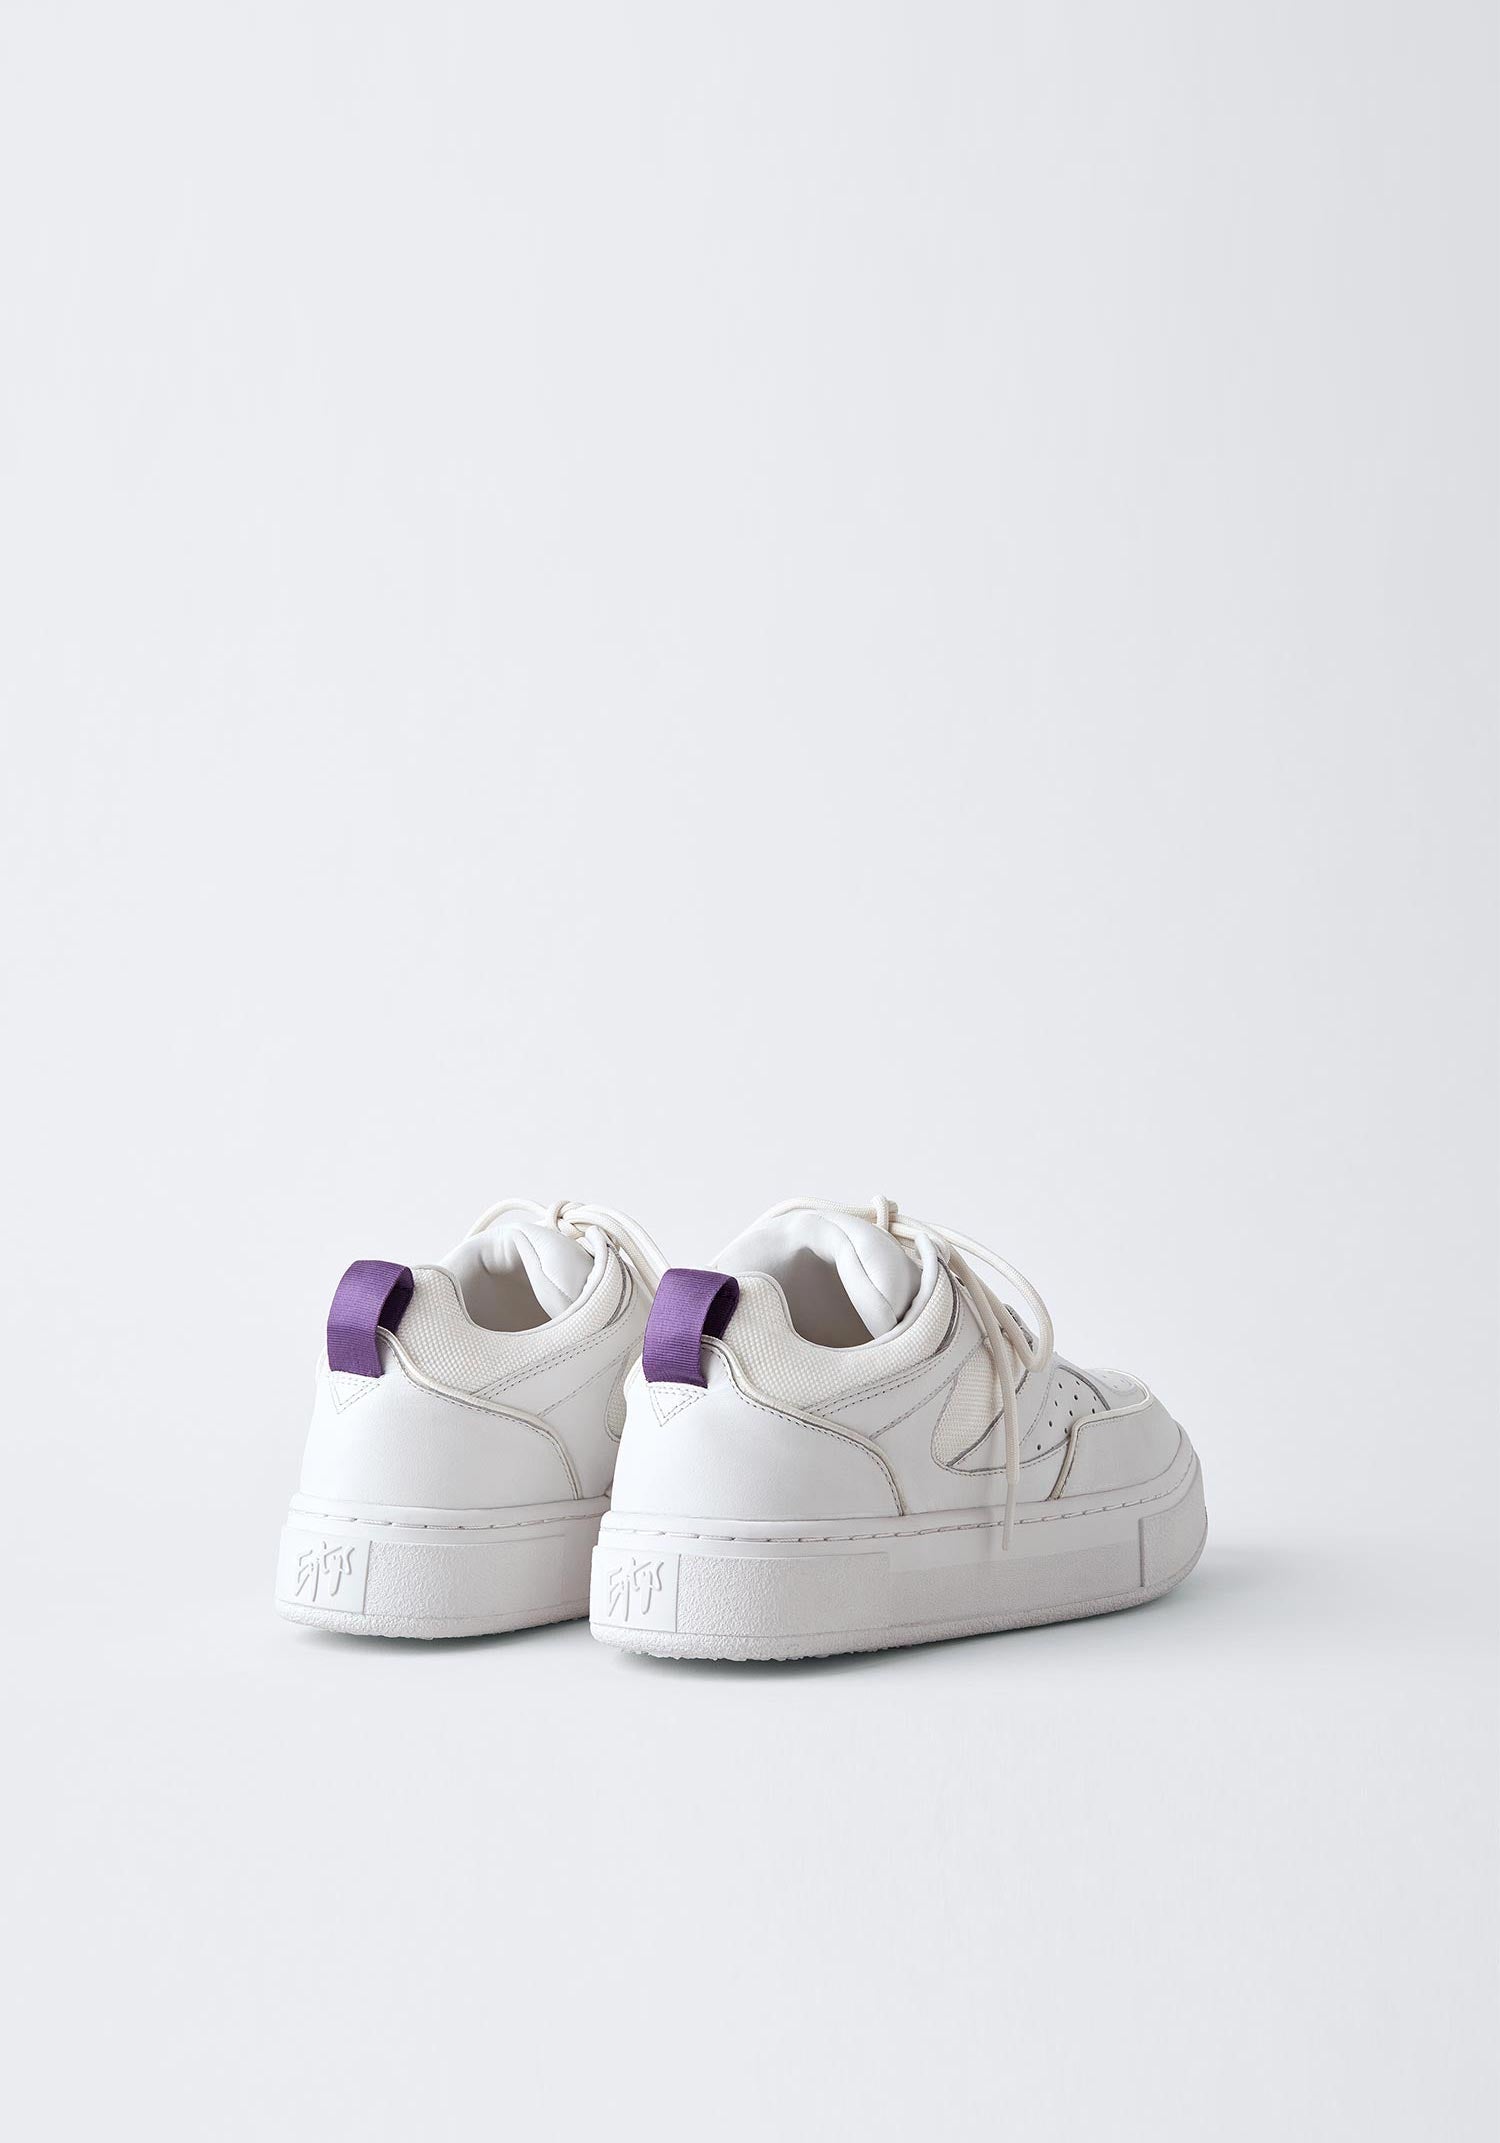 Eytys Sidney Sneakers White